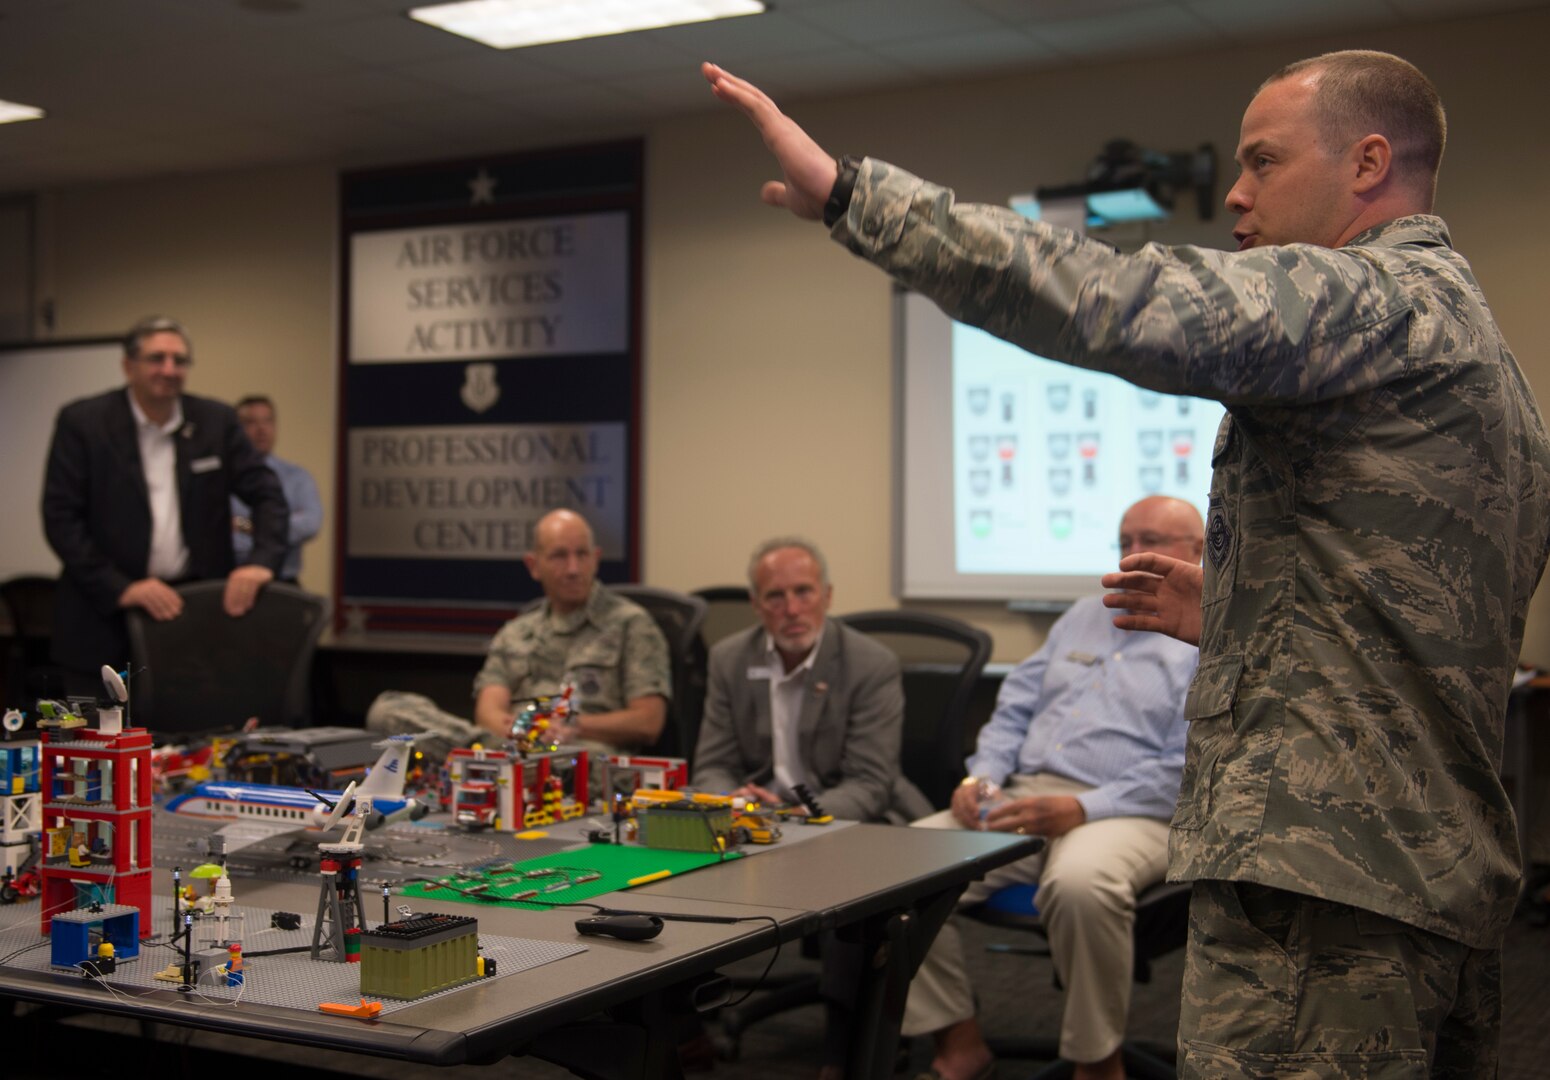 Capt. Justin Ball, 390th Cyberspace Operations Squadron Weapons and Tactics chief, explains the purpose of the 90th Cyber Operations Squadron “Bricks-in-the-Loop” model to Gen. Mike Holmes, commander Air Combat Command, and civic leaders during a tour at Joint Base San Antonio-Lackland, Texas, May 31, 2018. The model is used as a cyber training tool to teach cyber Airmen information technology and operational technology network defense. The tour was hosted to introduce attendees to 24th Air Force's cyberspace mission and 25th AF's intelligence, surveillance and reconnaissance mission. (U.S. Air Force photo by Tech. Sgt. R.J. Biermann)